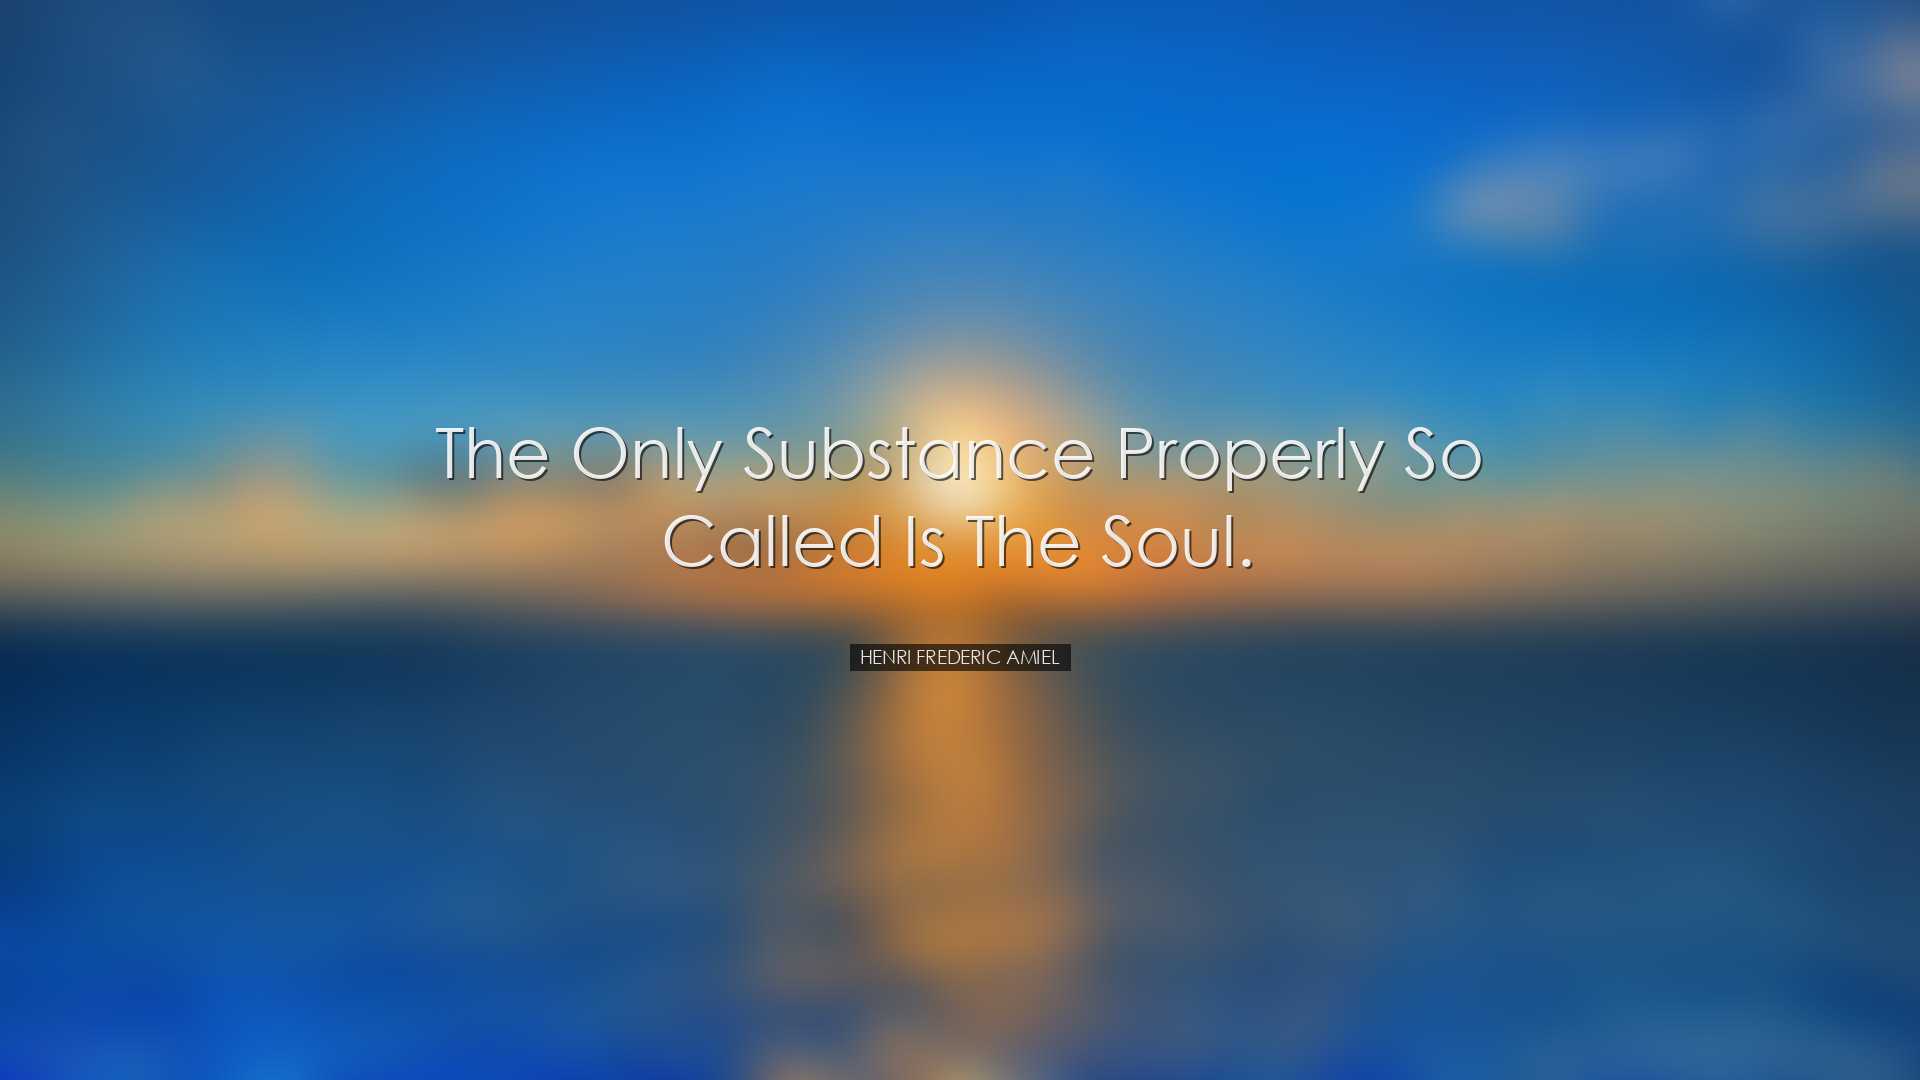 The only substance properly so called is the soul. - Henri Frederi